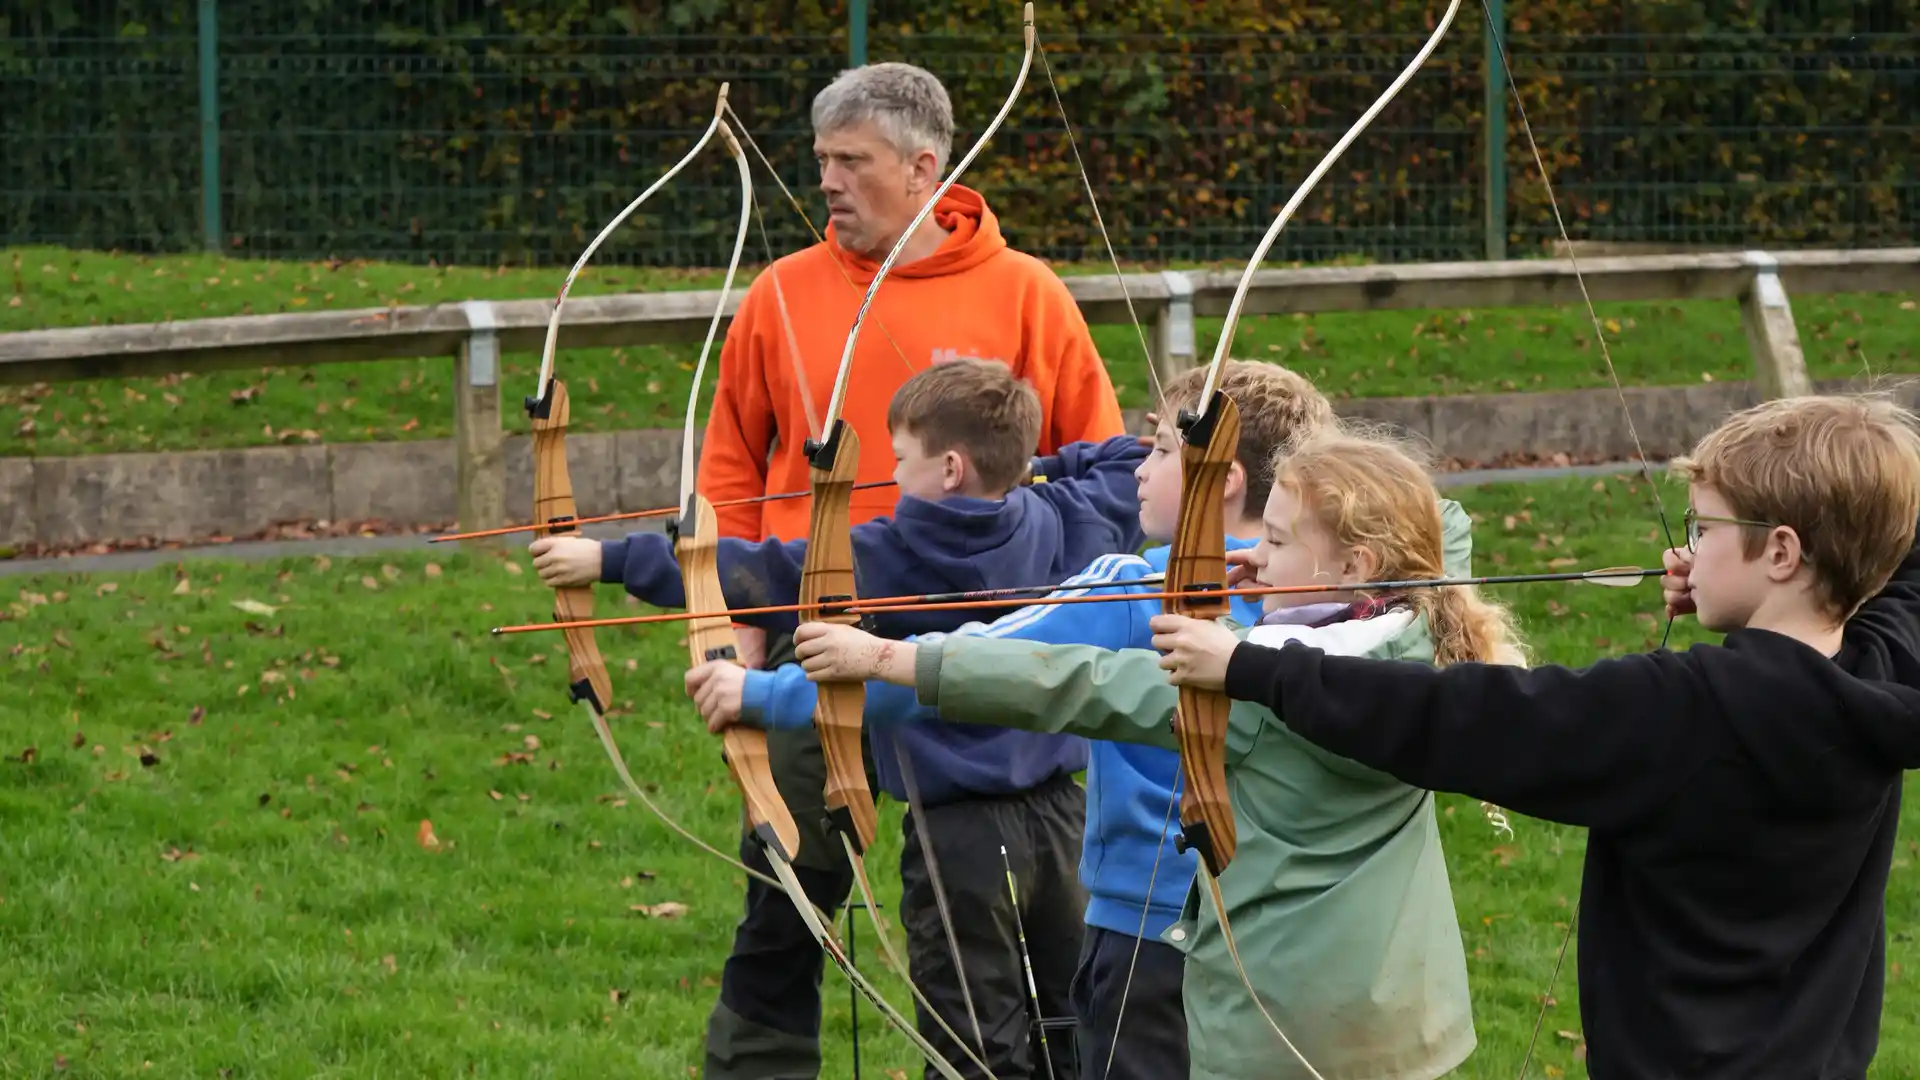 A group of children aiming during an archery lesson with a staff member.